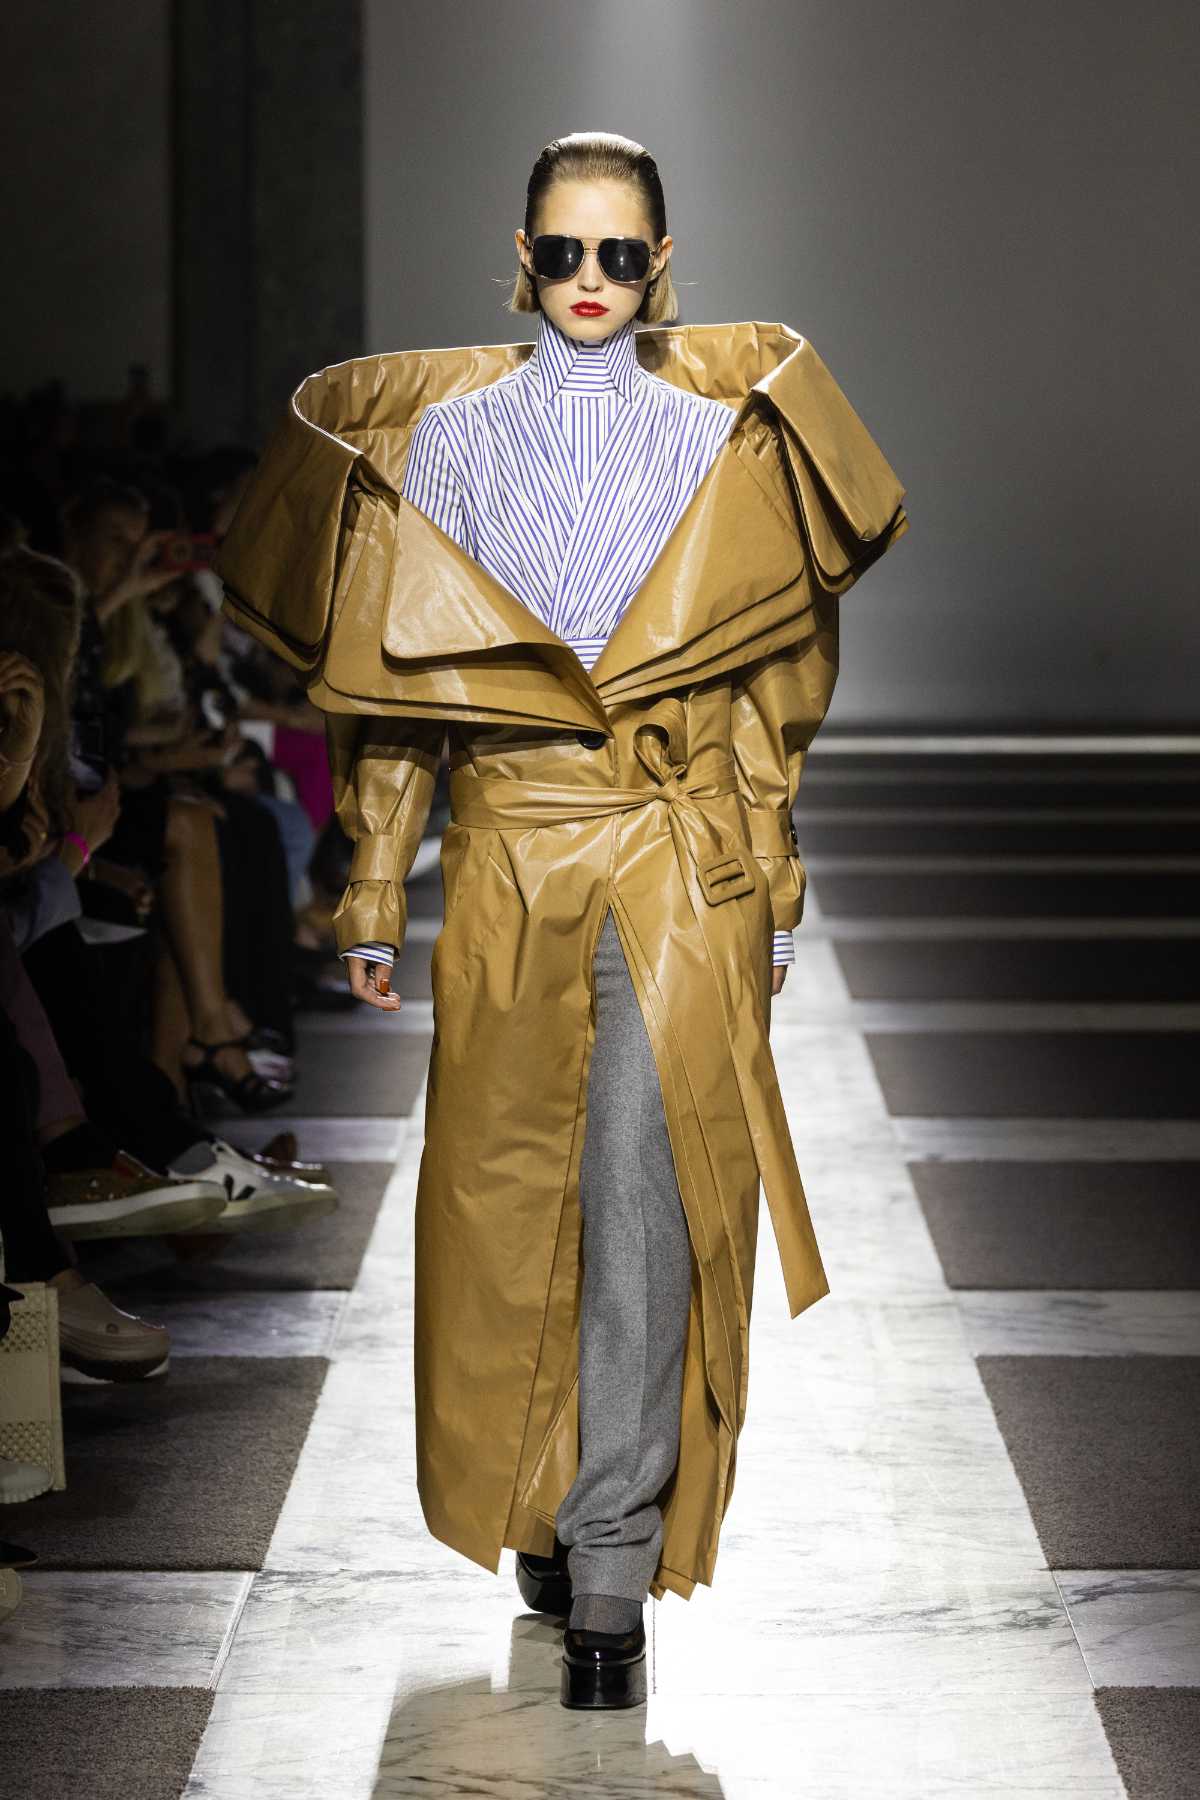 Viktor&Rolf Present Their Autumn Winter 2022 Haute Couture Collection